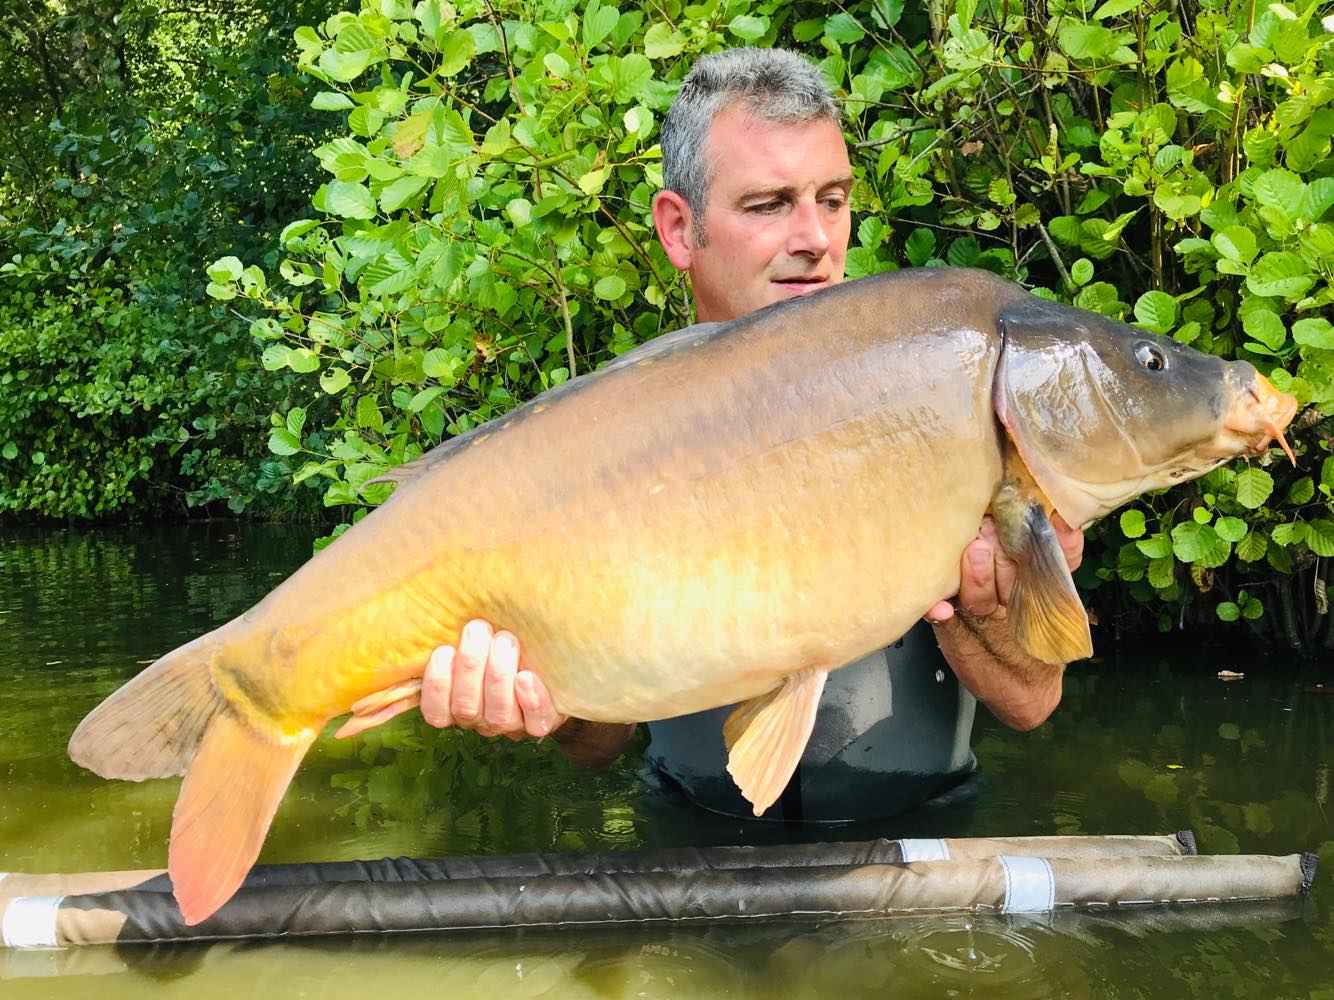 Carp fishing holidays with accommodation in France